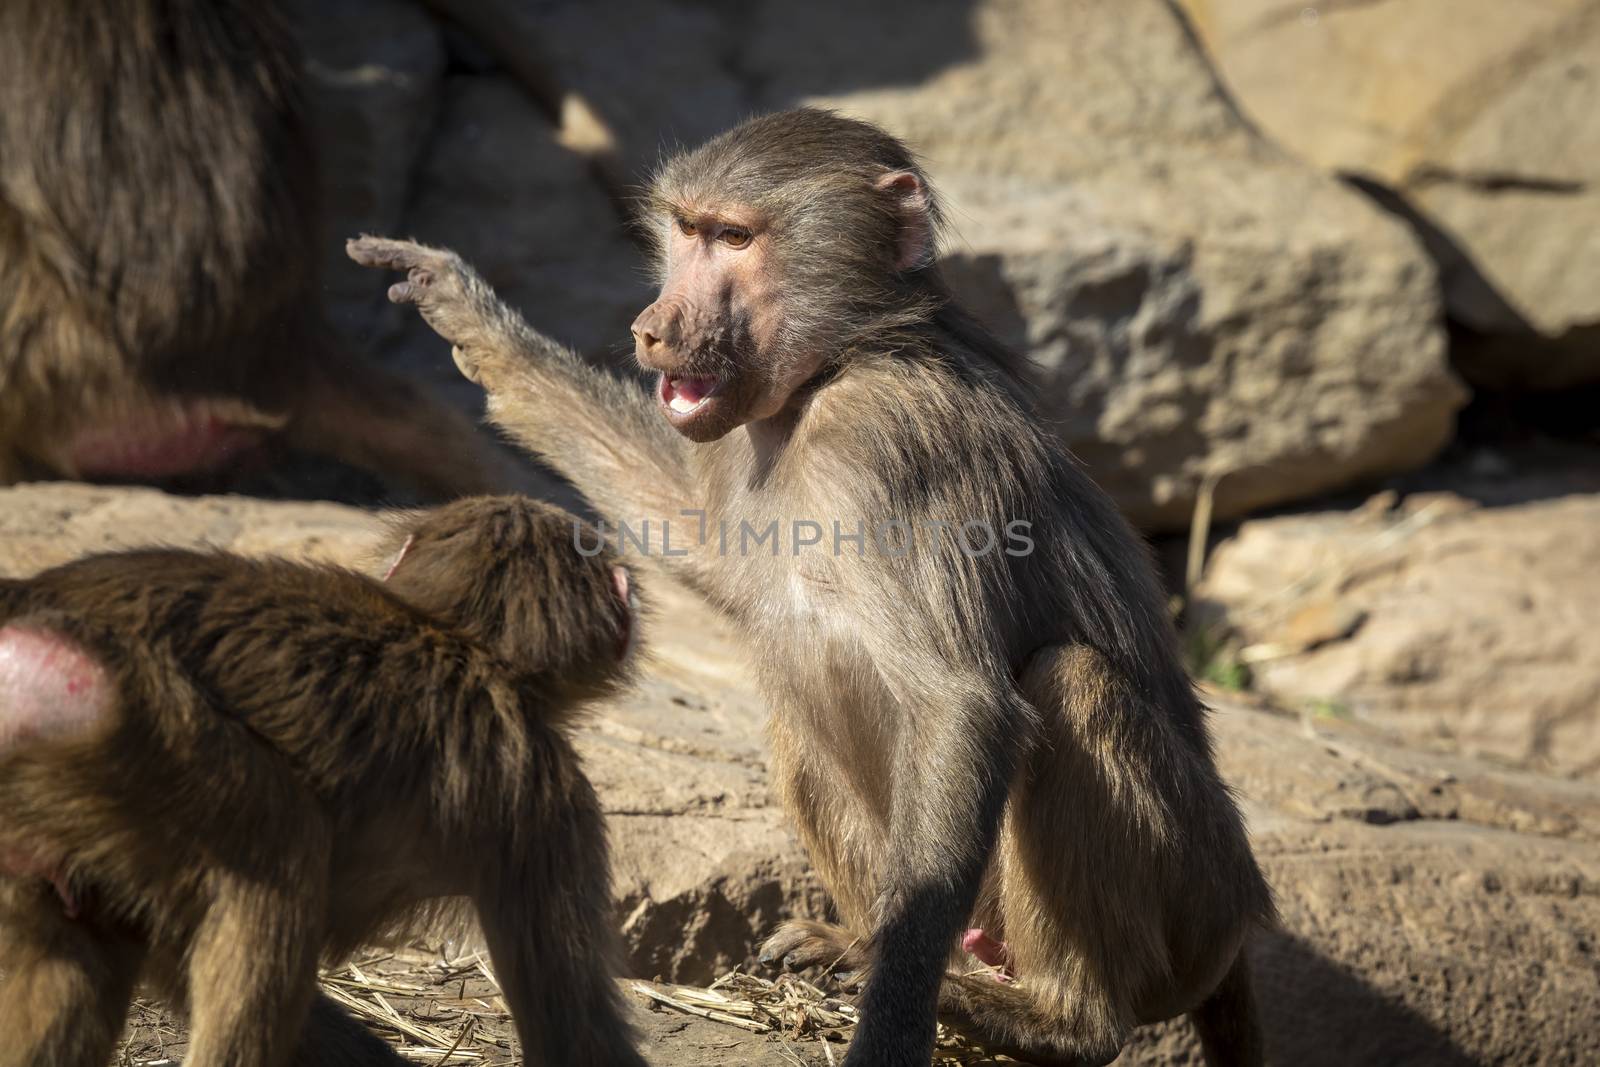 Two adolescent Hamadryas Baboons playfully fighting